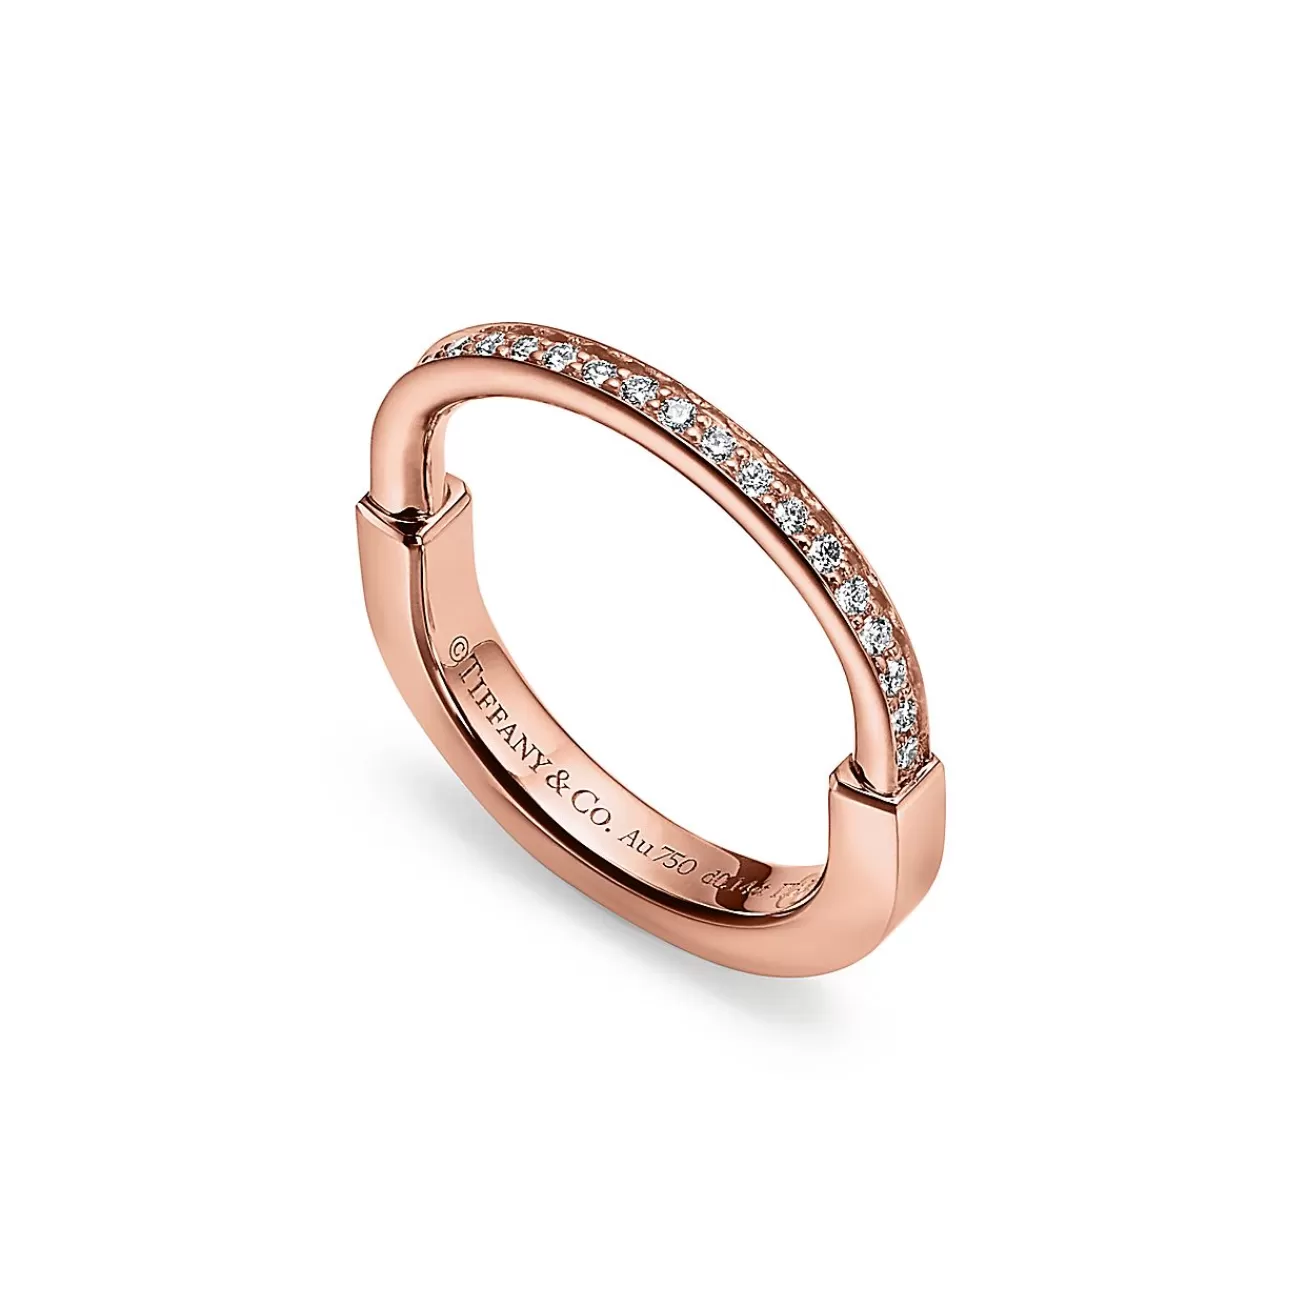 Tiffany & Co. Tiffany Lock Ring in Rose Gold with Diamonds | ^ Rings | Stacking Rings